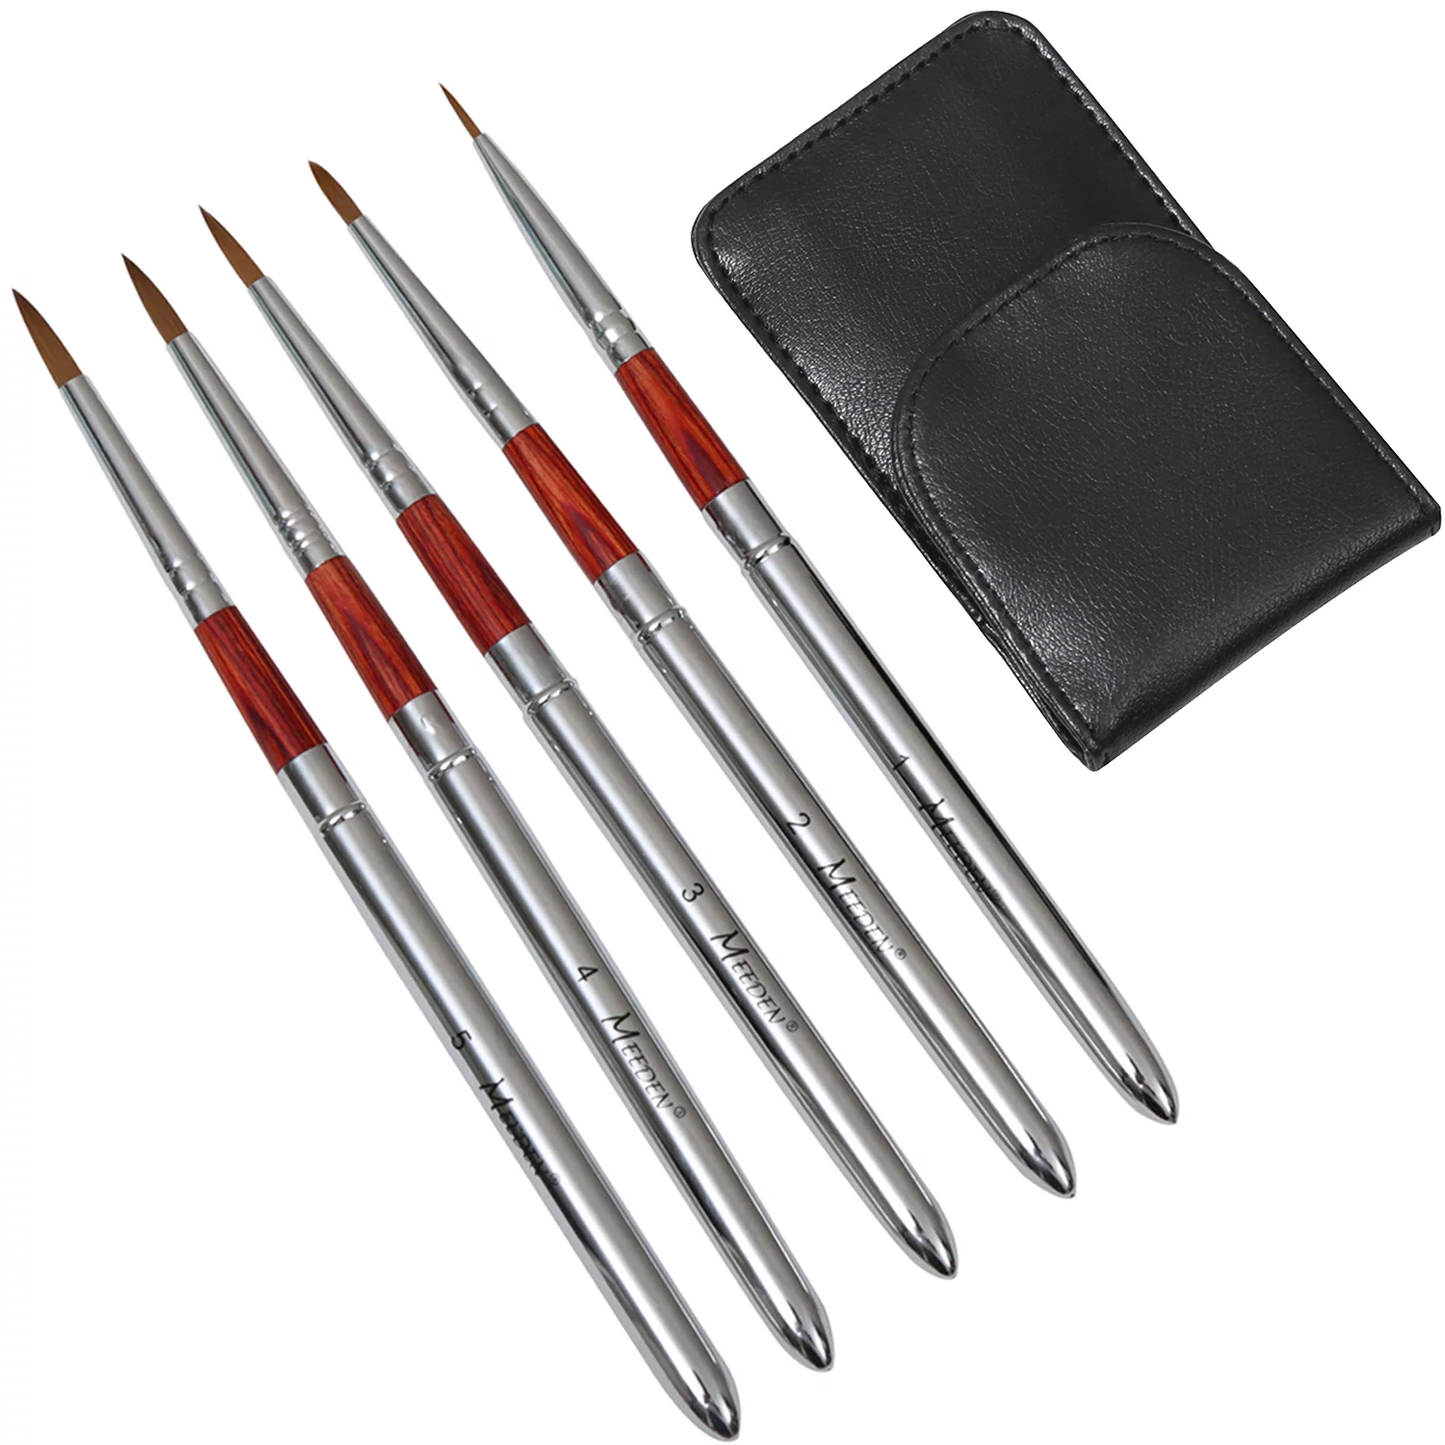 Travel Set of Brushes: 5 Round with case